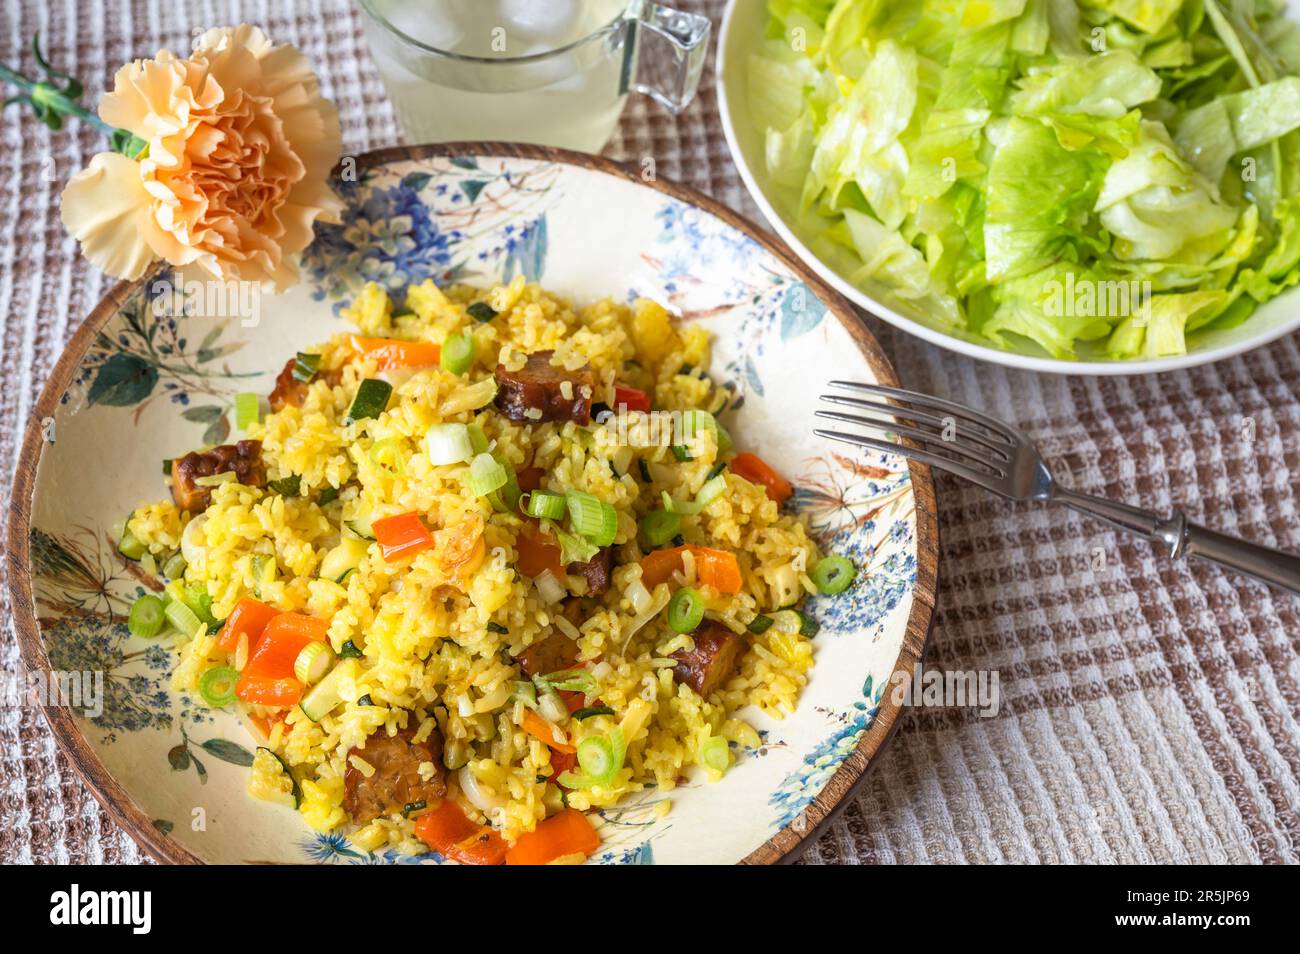 Vegetarian meal. Turmeric rice with green onion, orange pepper, zucchini and tempeh on decorative plate, lettuce salad, flower and drink on table. Stock Photo